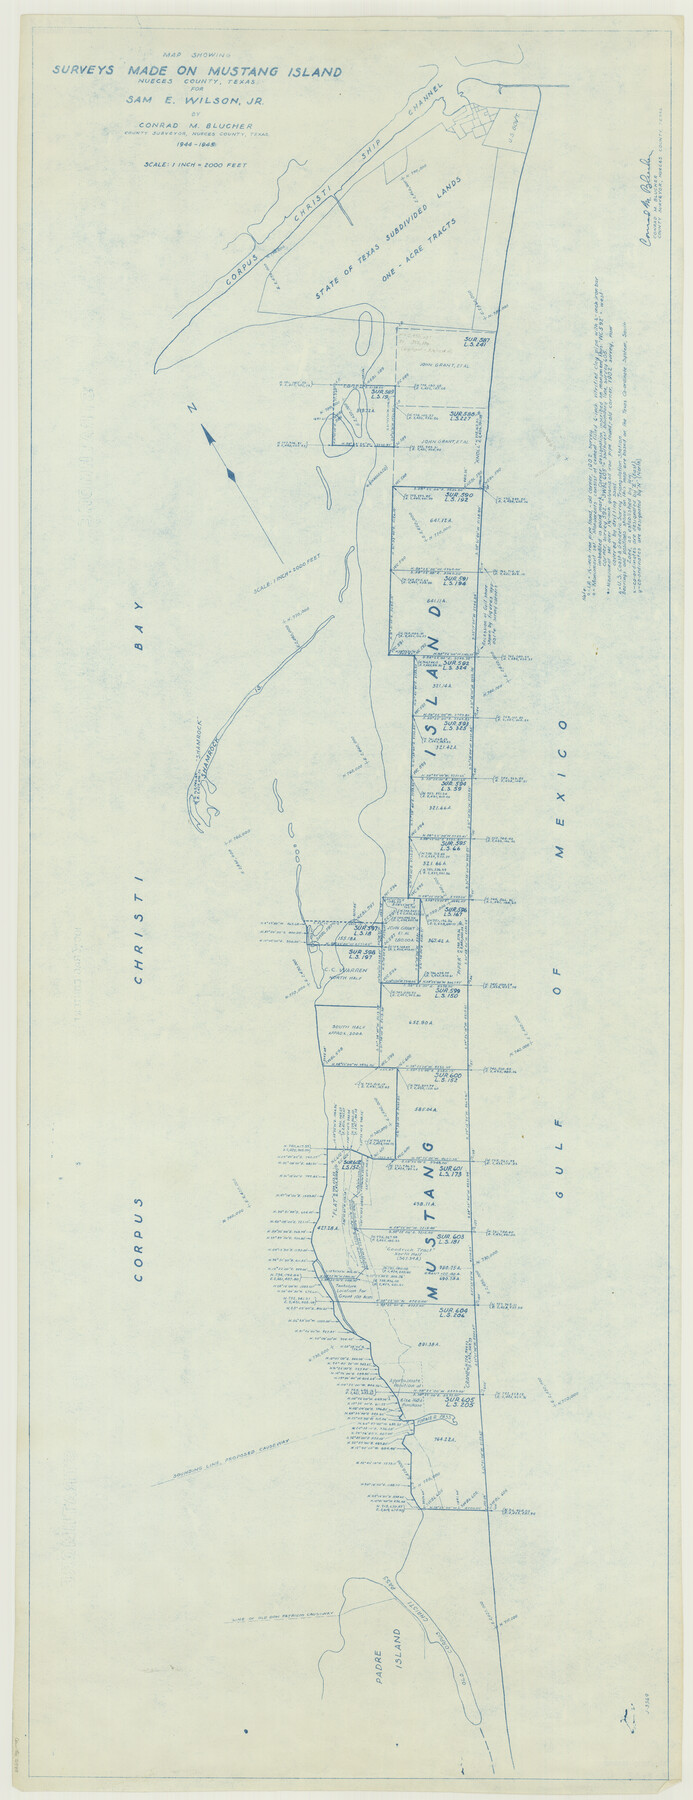 2948, Map showing surveys made on Mustang Island, General Map Collection